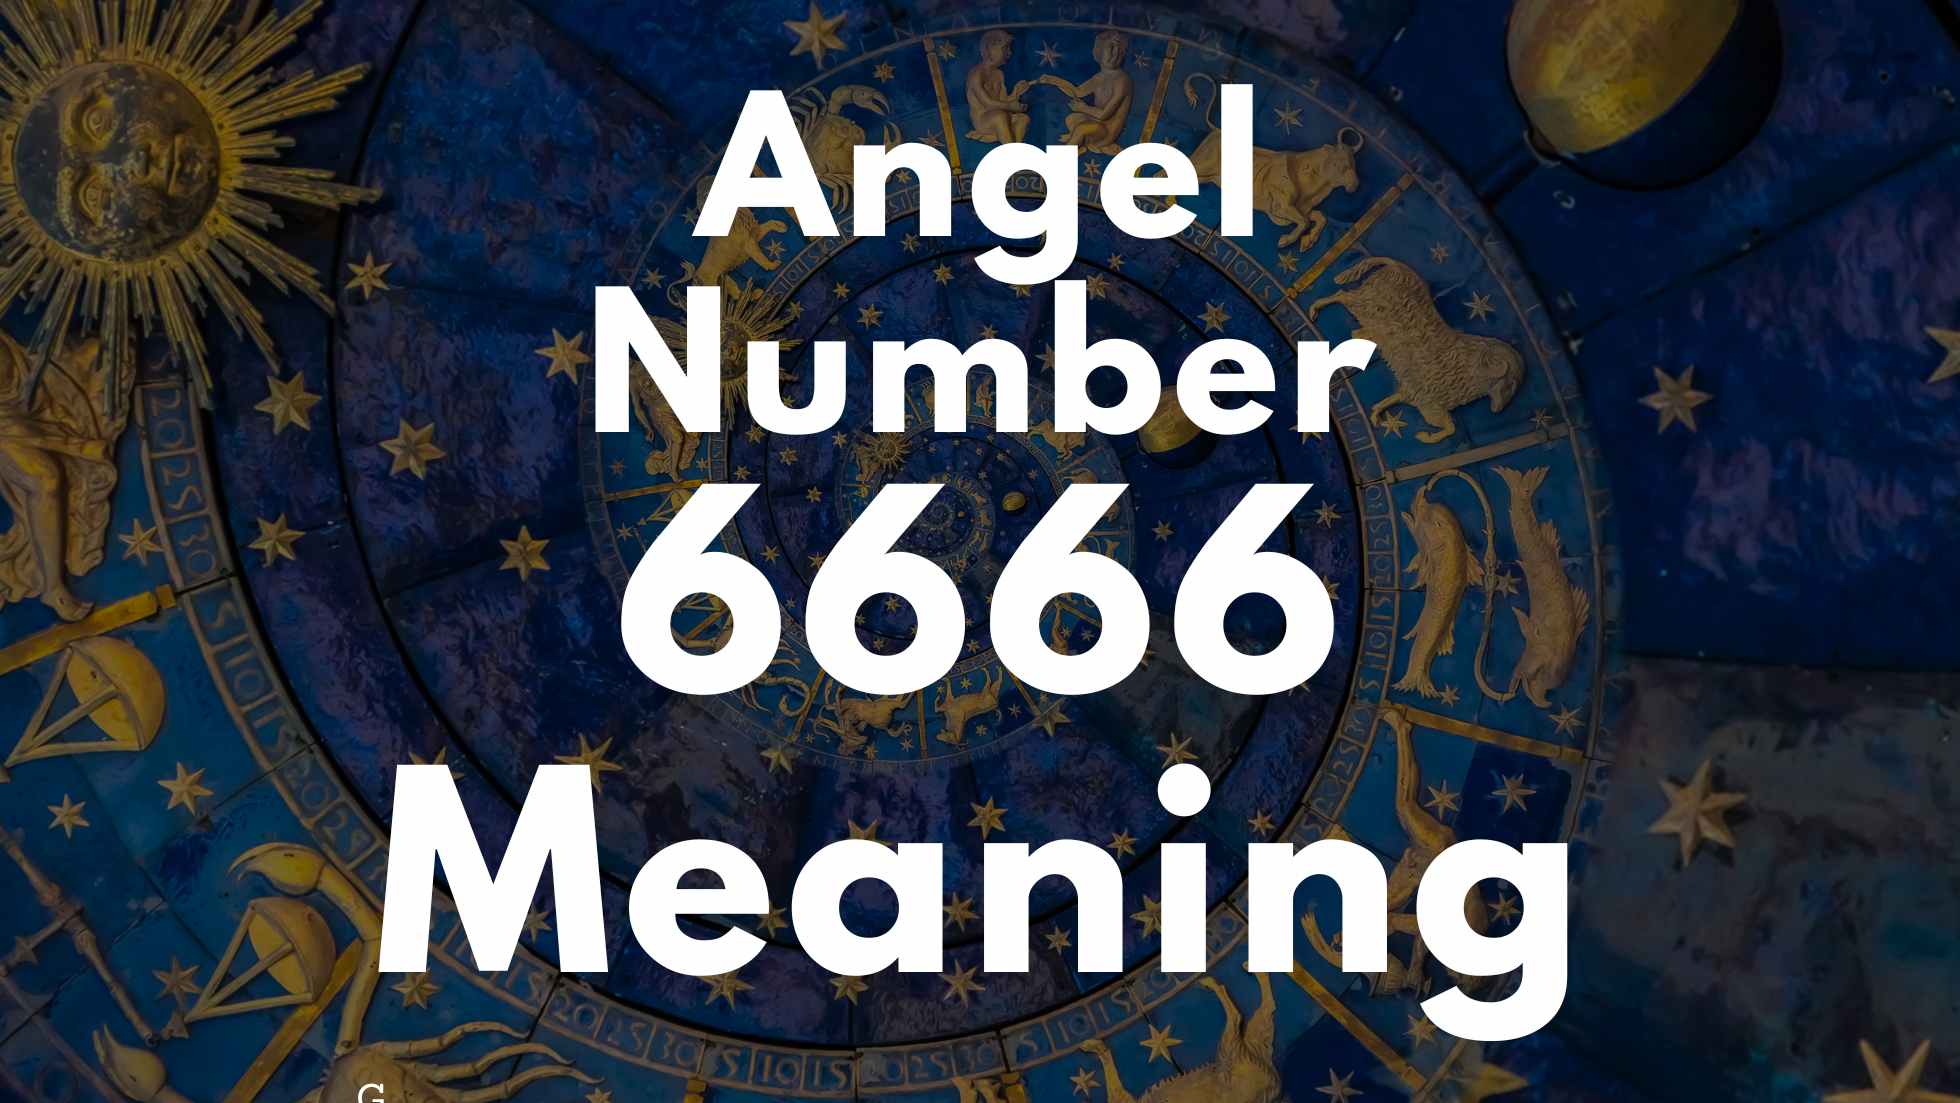 Angel Number 6666 Spiritual Meaning, Symbolism, and Significance